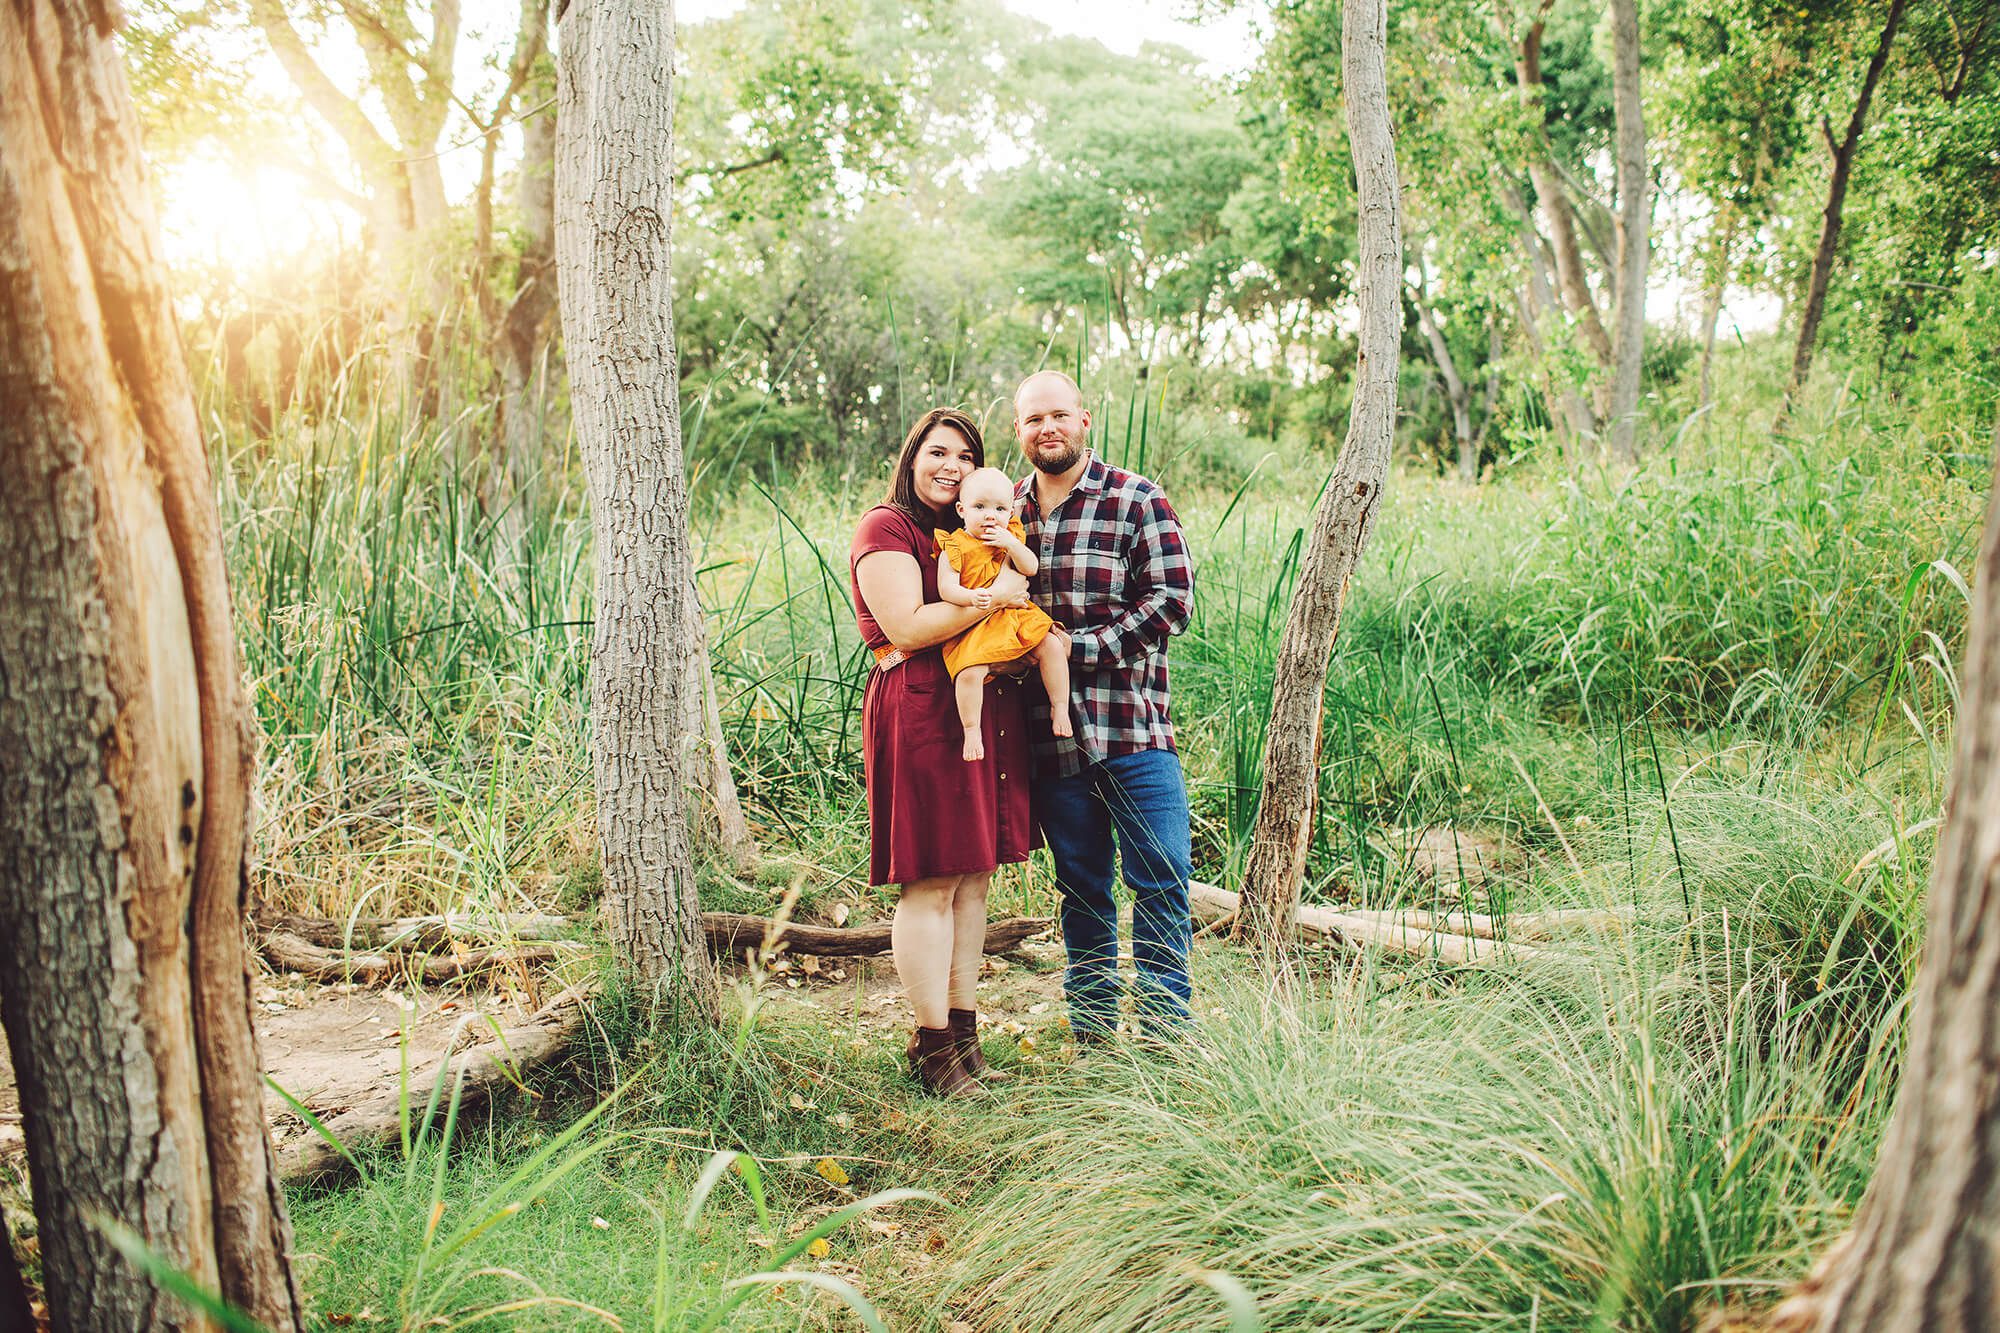 The Tawney family looking beautiful in the lovely wooded creek plain of Southern Arizona.